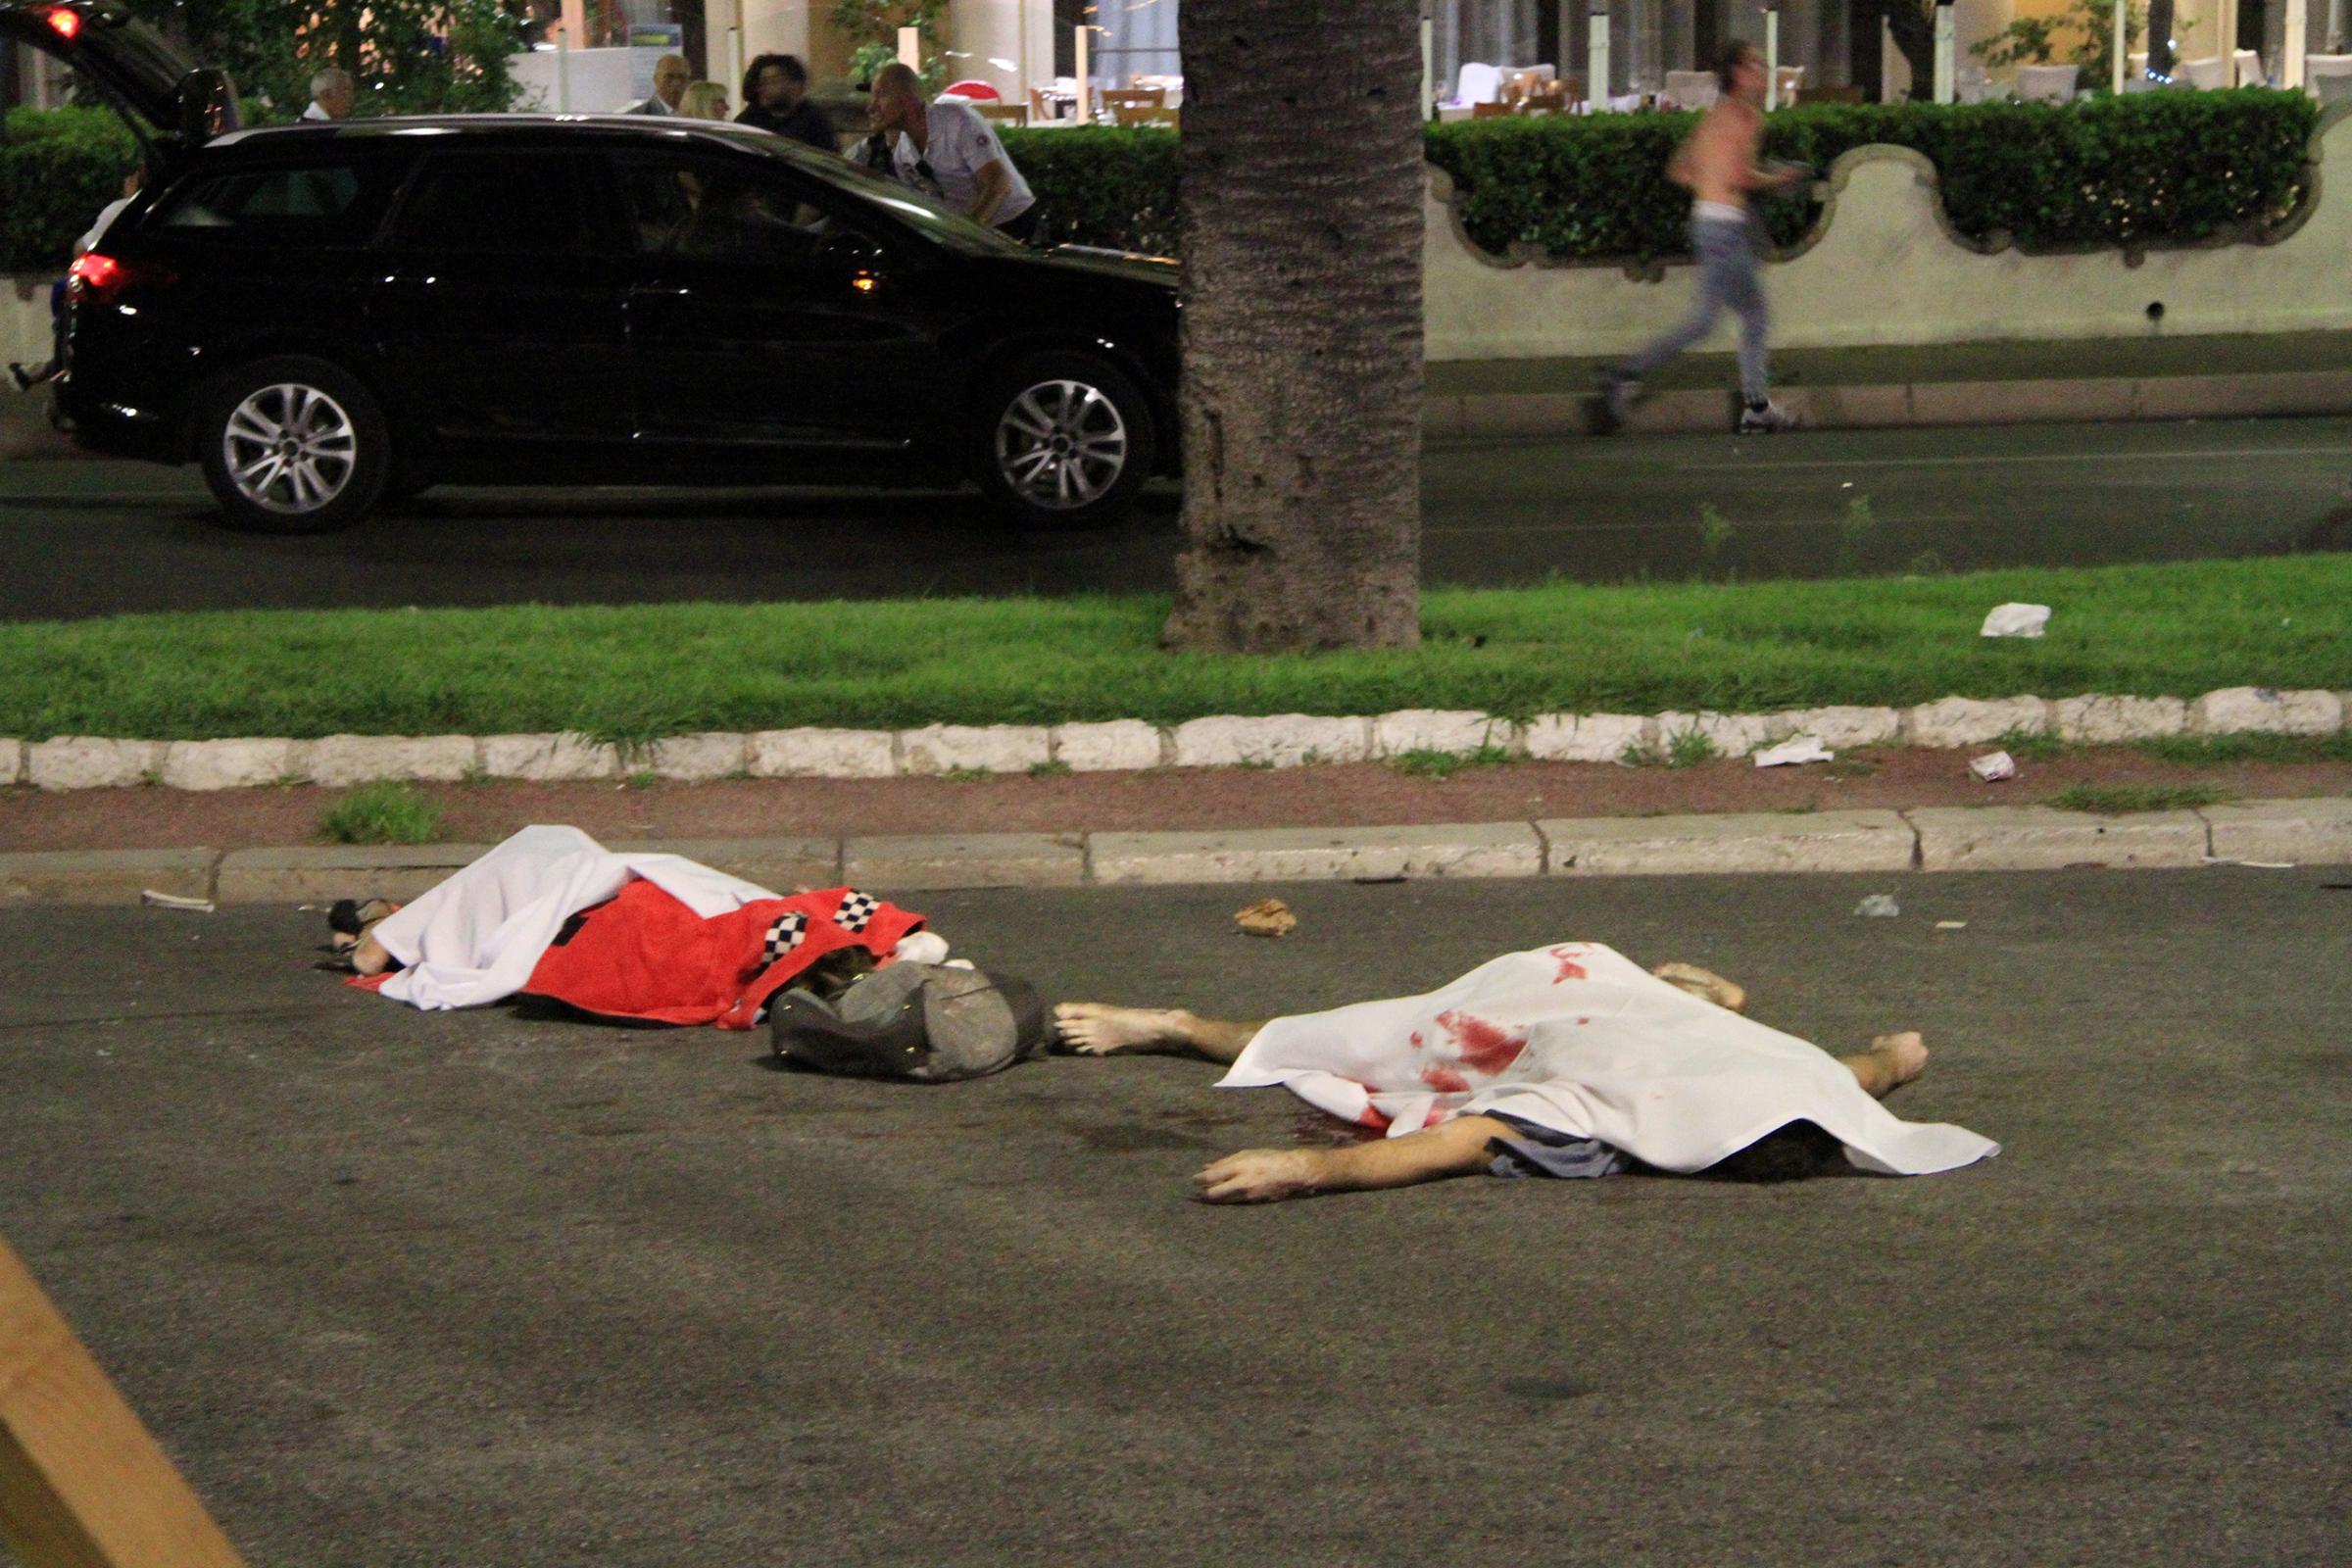 Bodies lie in the streets of Nice, France, after a terrorist attack left at least 77 dead and dozens injured on July 14, 2016.